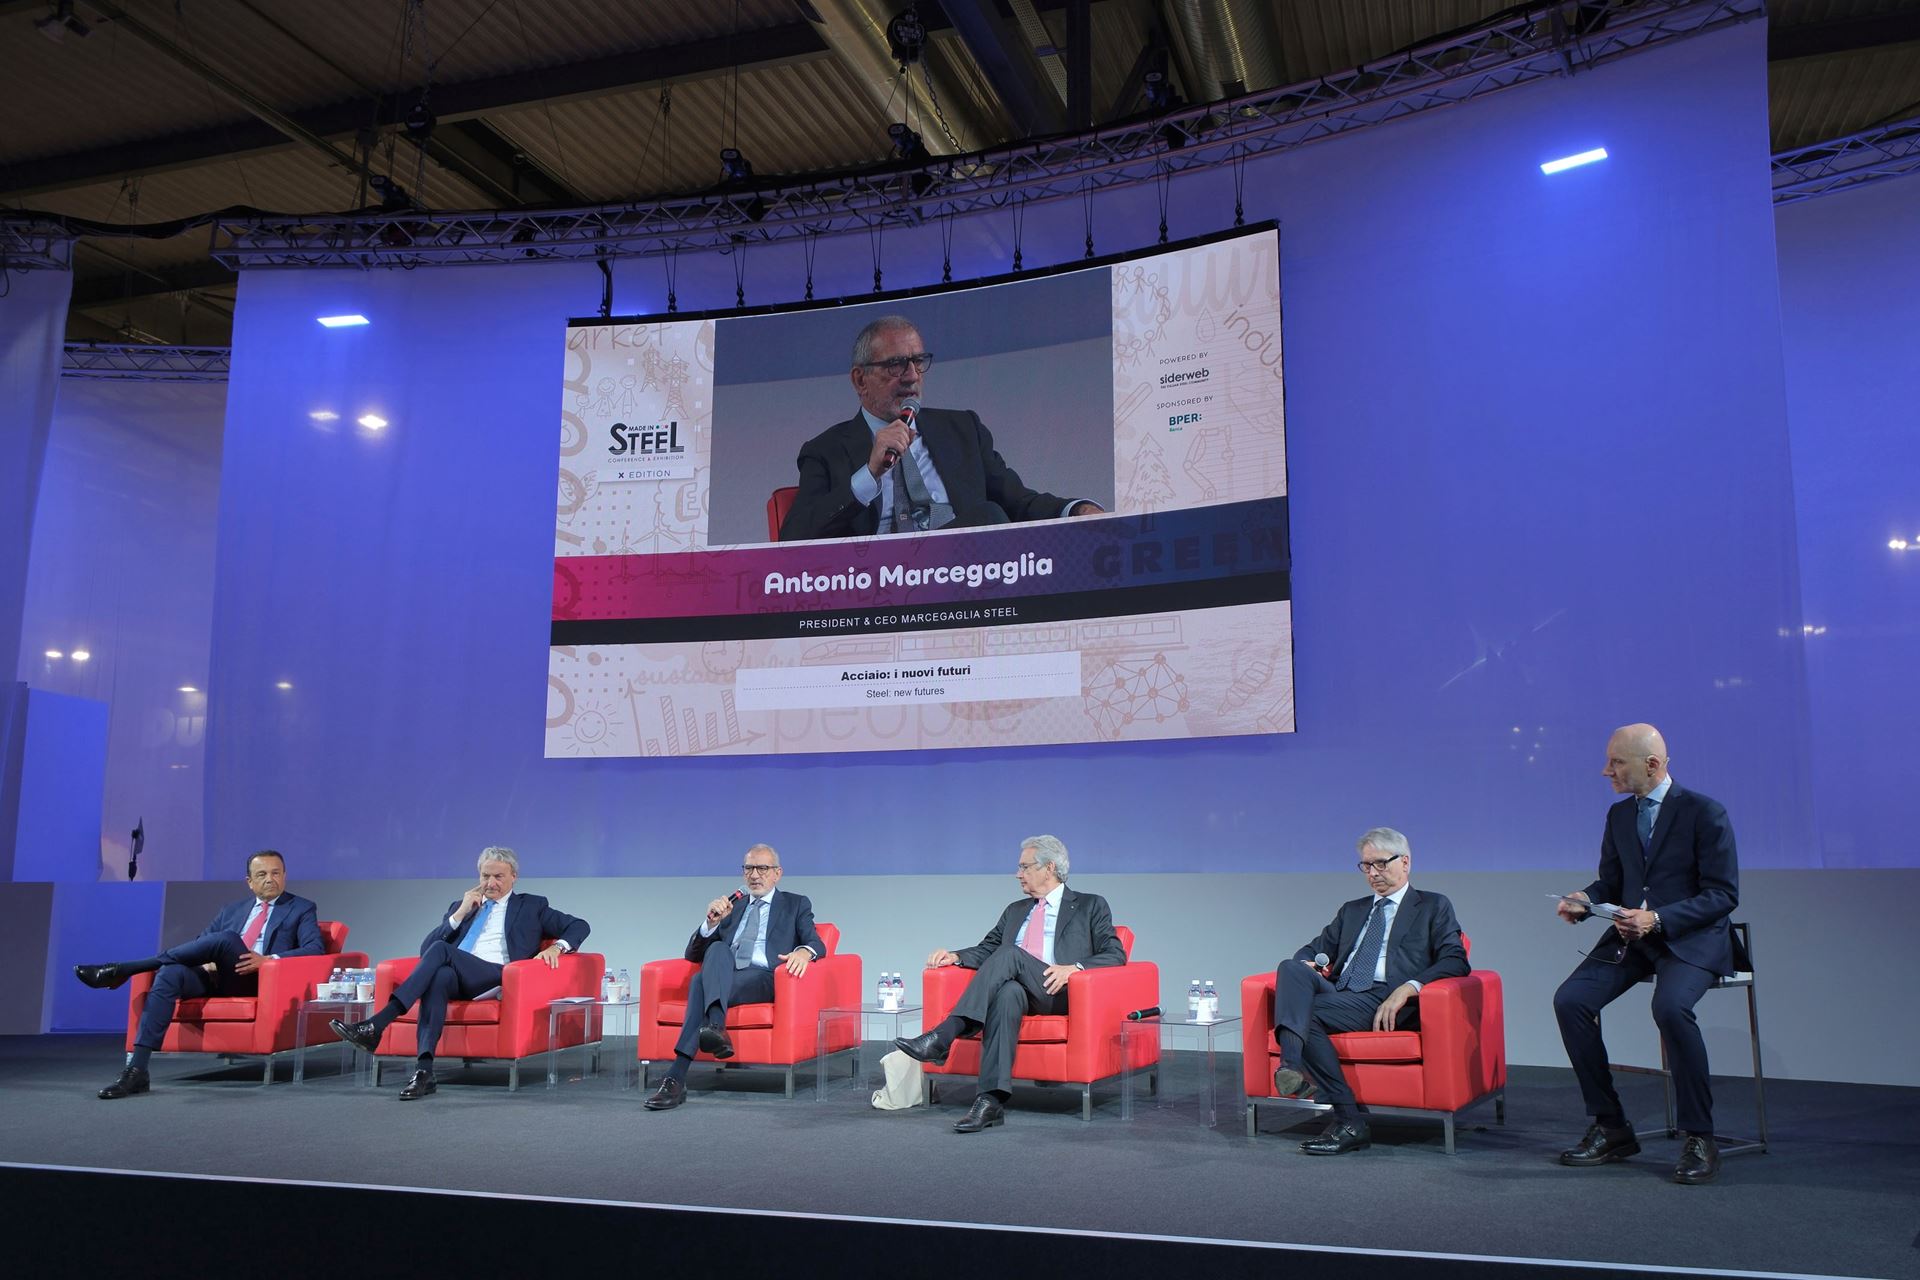 Made in Steel 2023 concluded with the "Steel: New Futures" conference